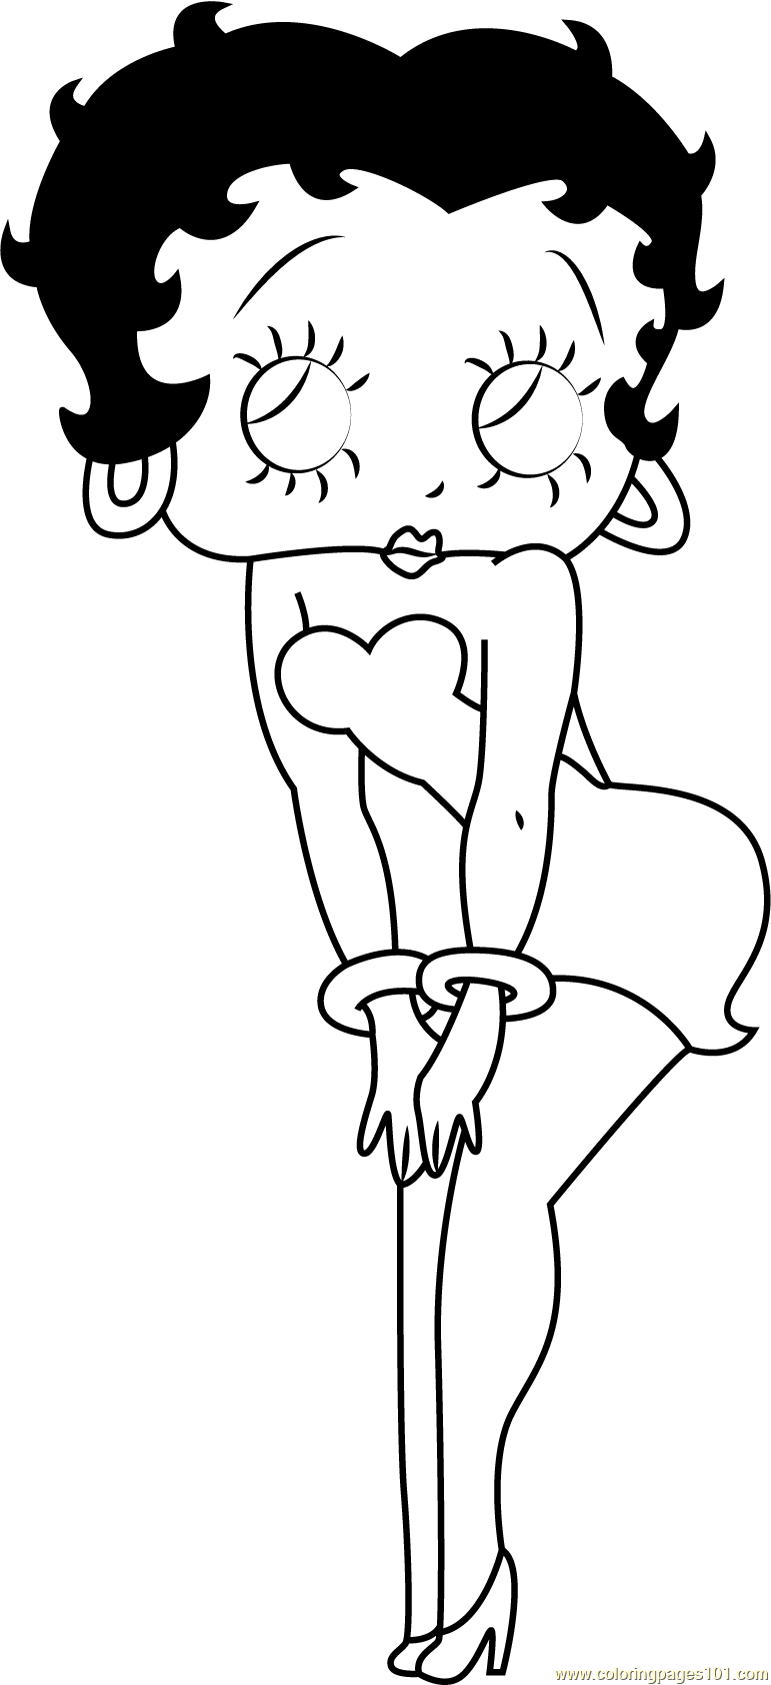 Betty Boop Looking Up Coloring Page for Kids   Free Betty Boop ...